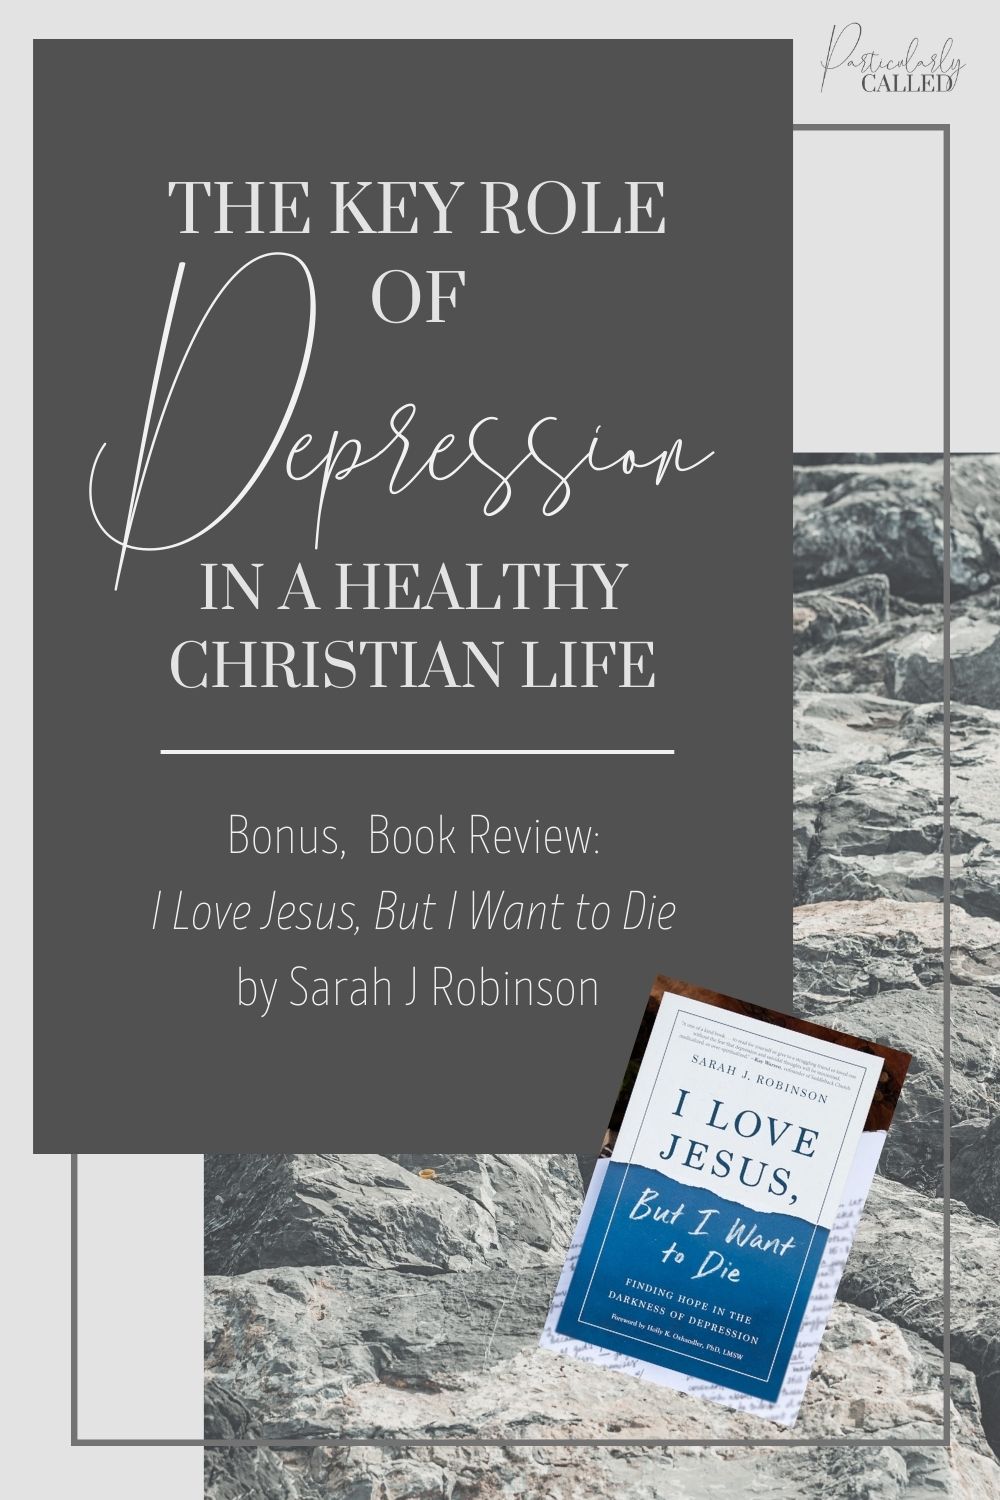 Does Depression play a Key Role in the Christian life?